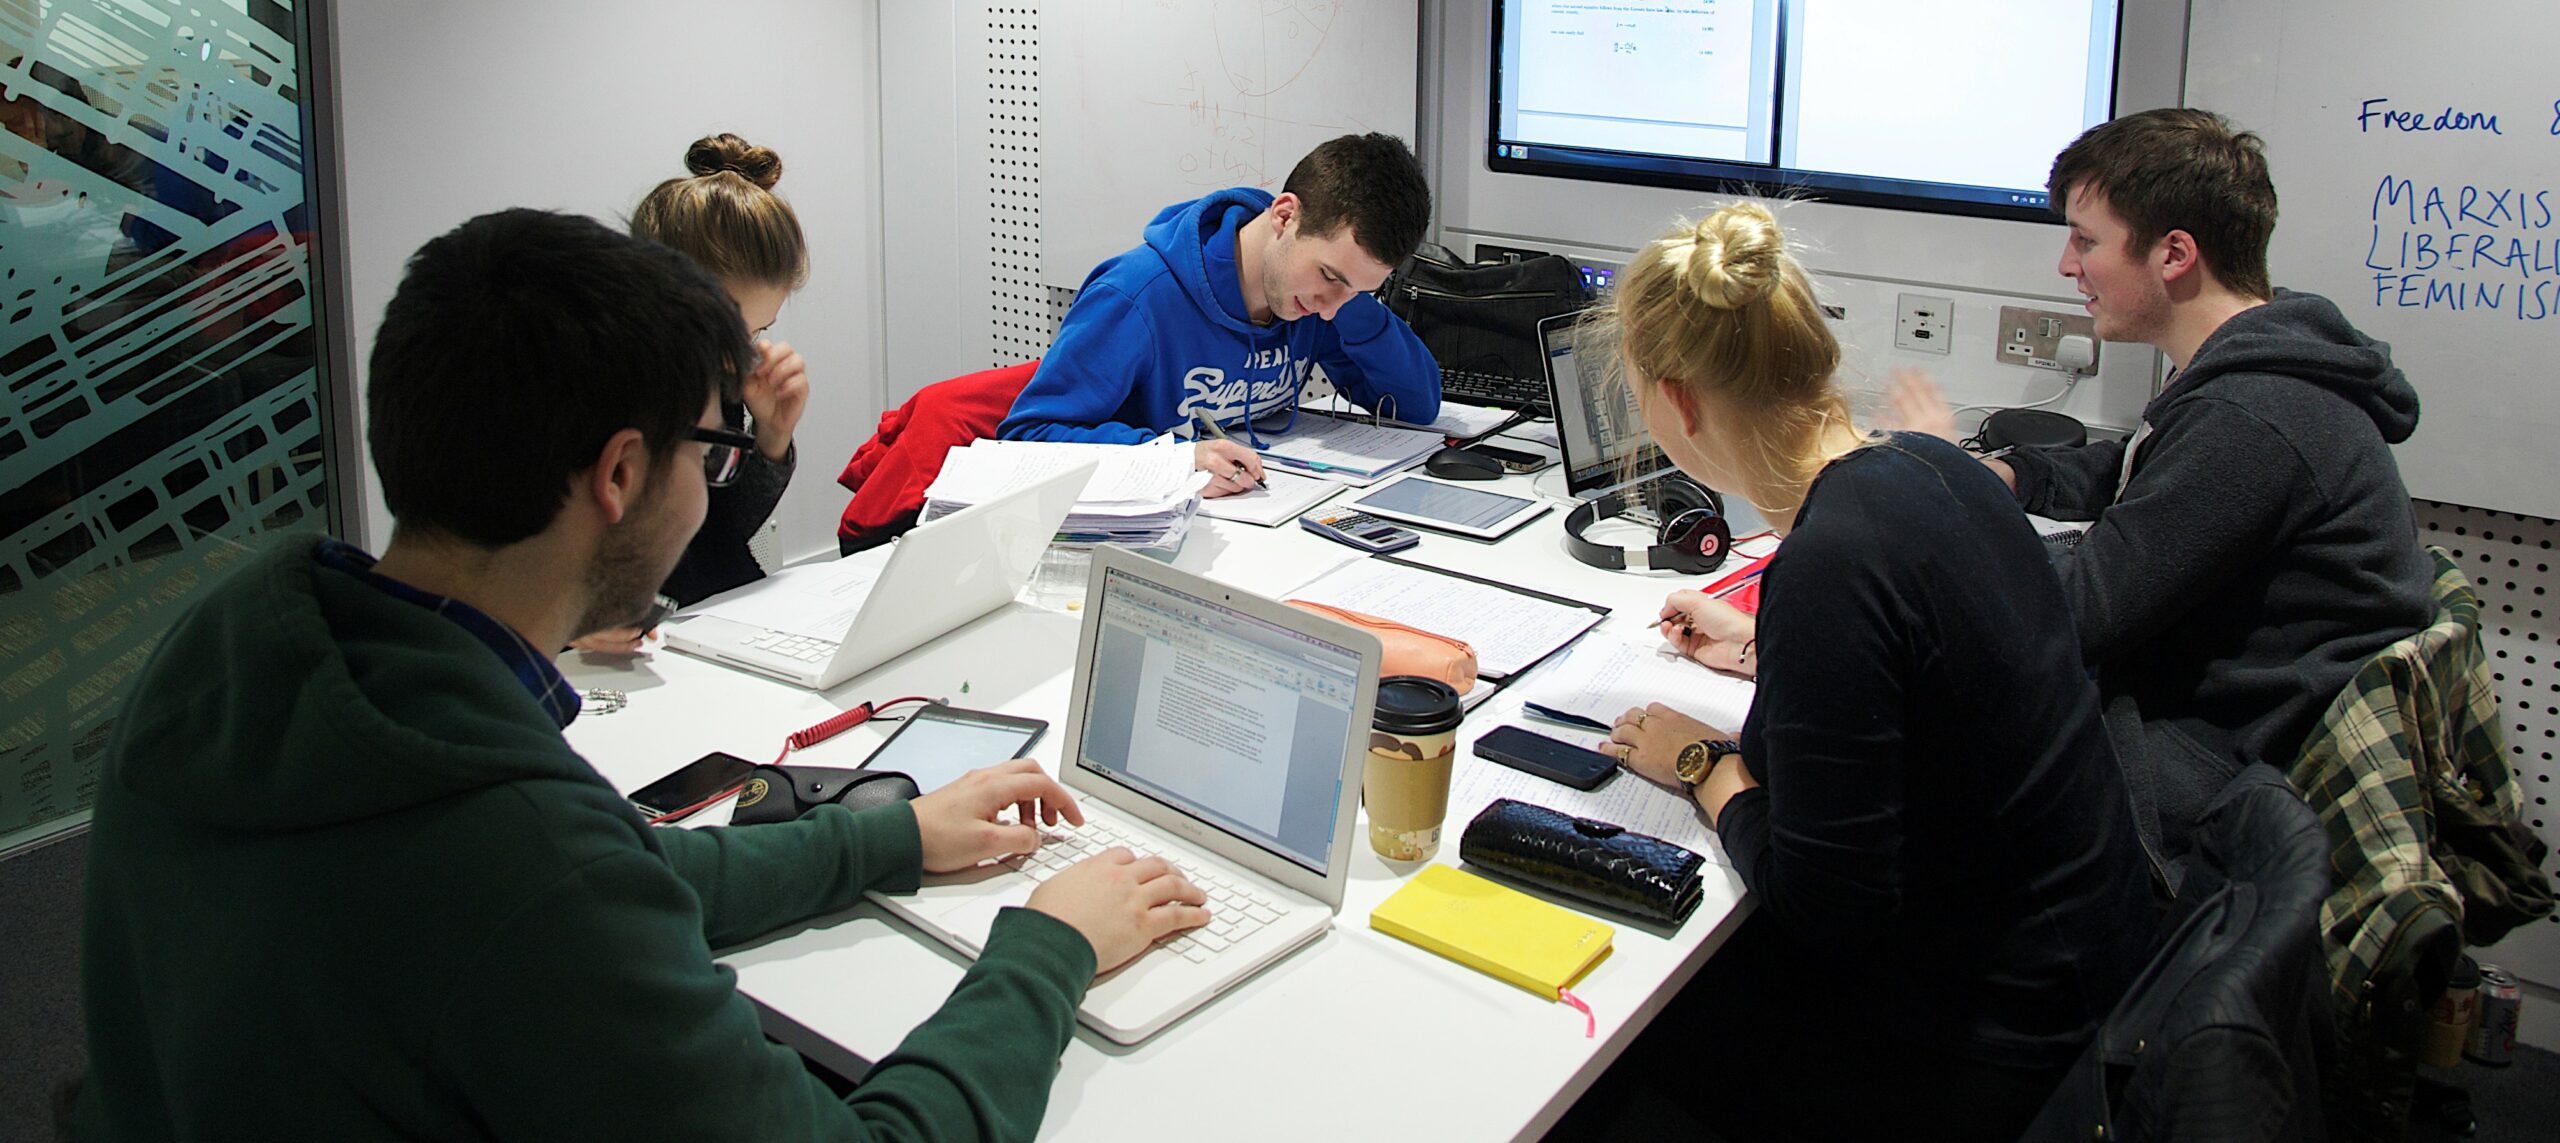 A group of students working on computers